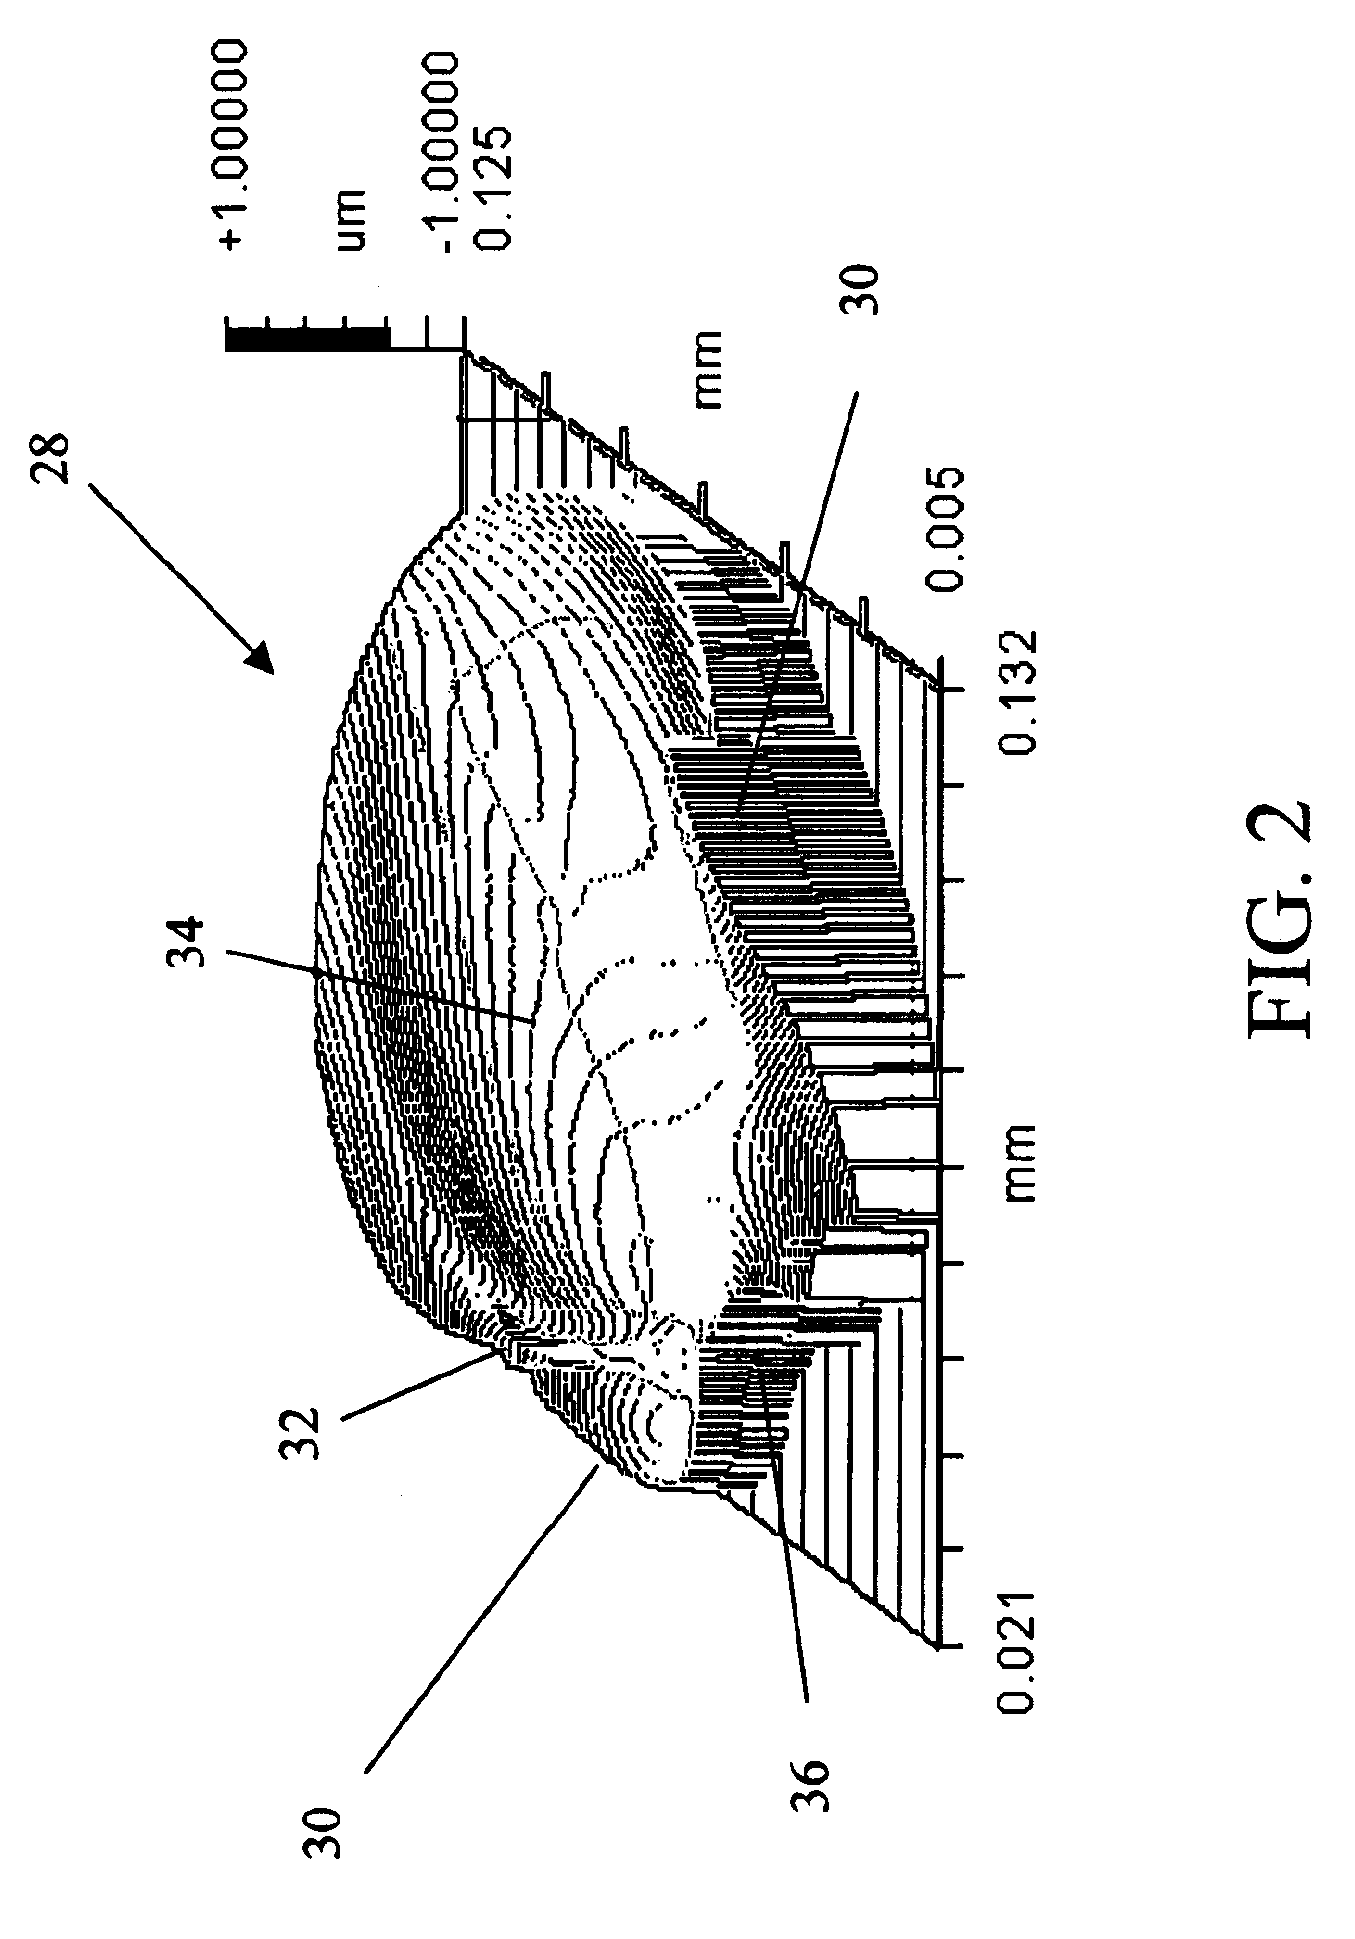 Method of fusion splicing thermally dissimilar glass fibers